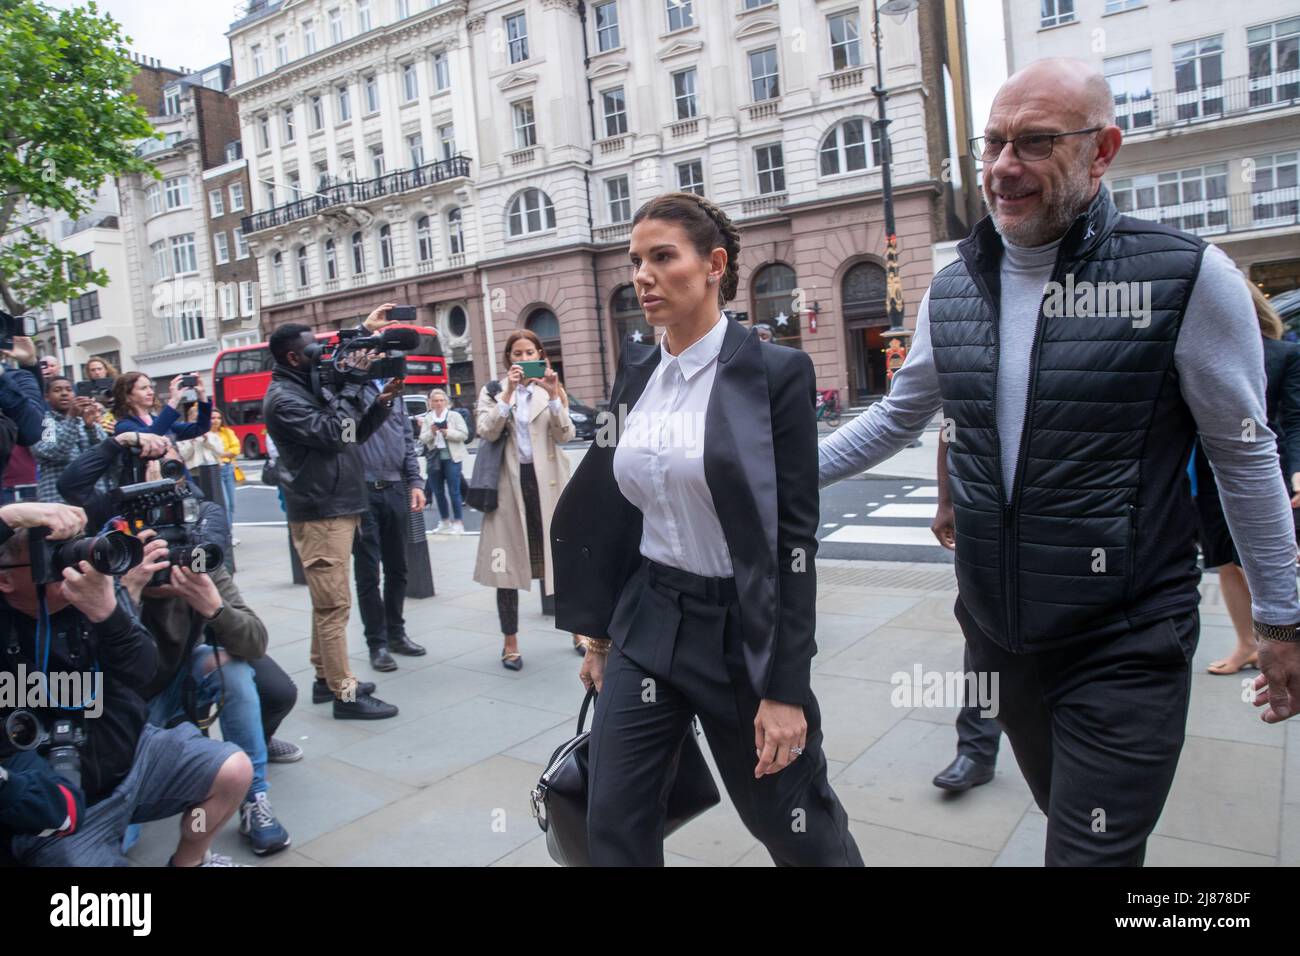 London, UK. 13th May, 2022. Rebekah Vardy arrives at The Royal Courts of Justice for her libel case with Coleen Rooney, Coleen Rooney who is the wife of Derby County manager and former England football player Wayne Rooney, and Rebekah Vardy, wife of Leicester City striker Jamie Vardy are locked in a libel battle also known as the 'Wagatha Christie' trial after accusations that Mrs Vardy leaked false stories about Mrs Rooney to the press. Credit: Lucy North/Alamy Live News Stock Photo